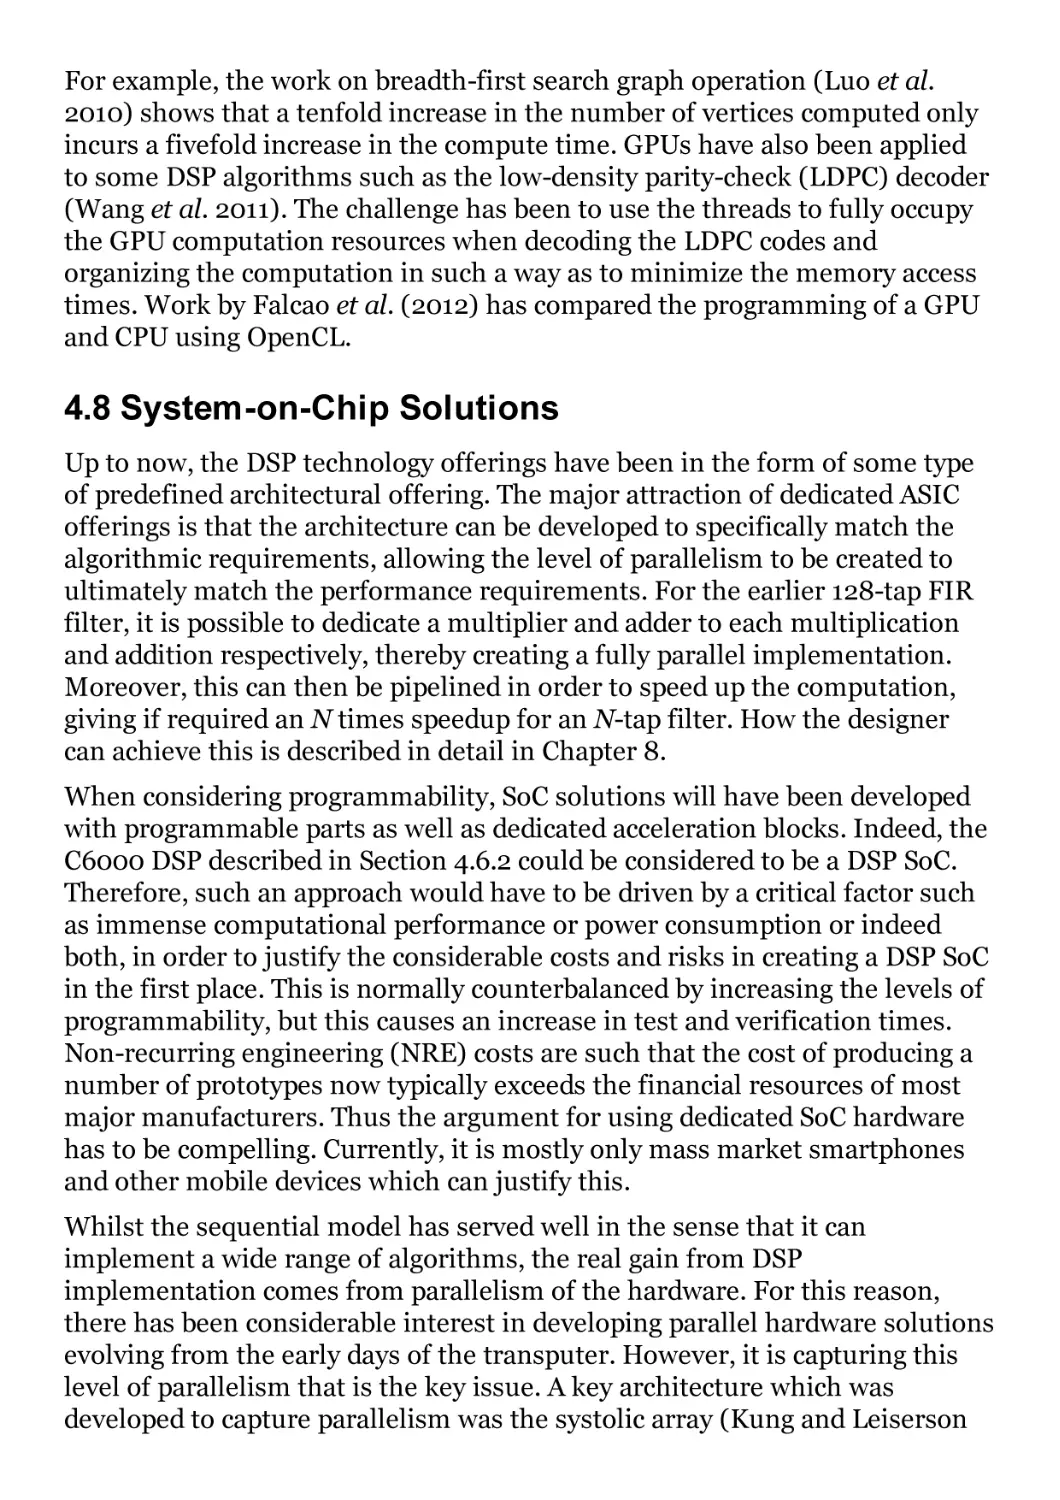 4.8 System-on-Chip Solutions